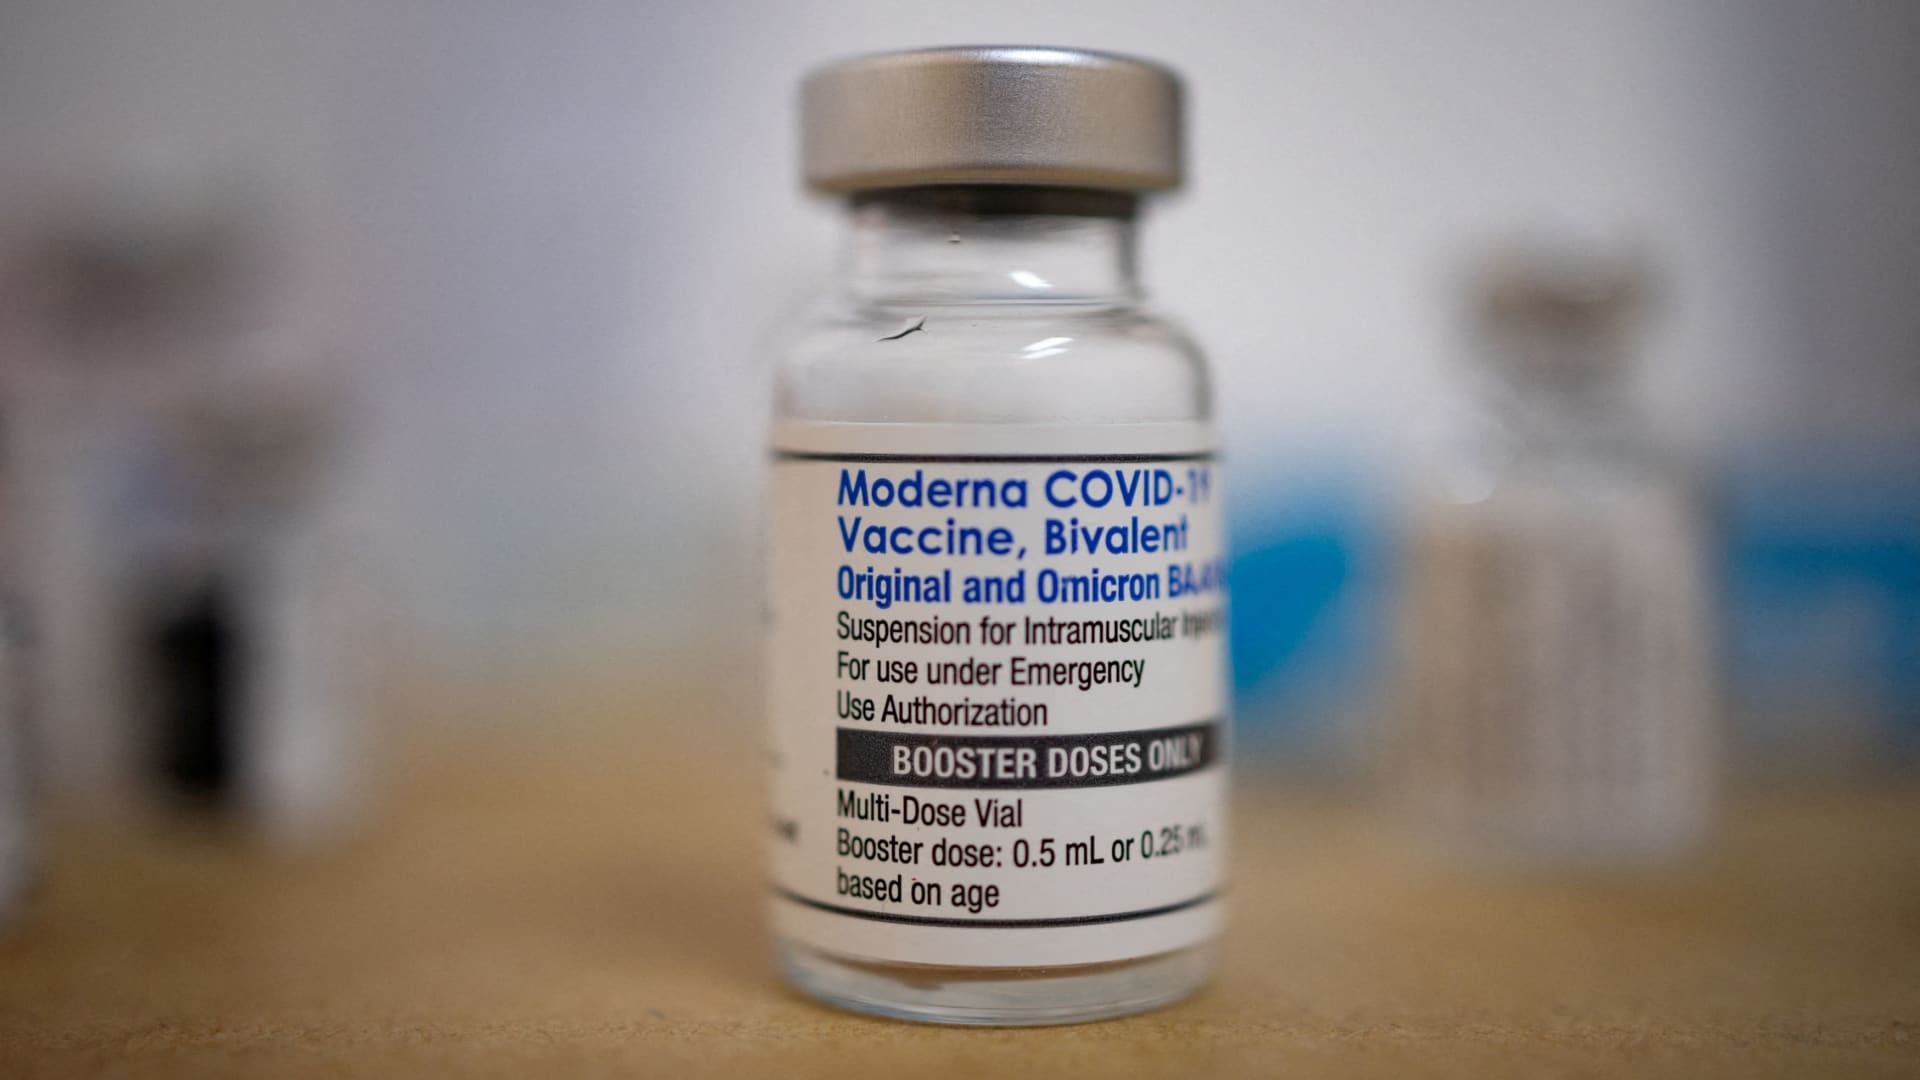 CDC clears updated Covid vaccines, allowing shots to start within days